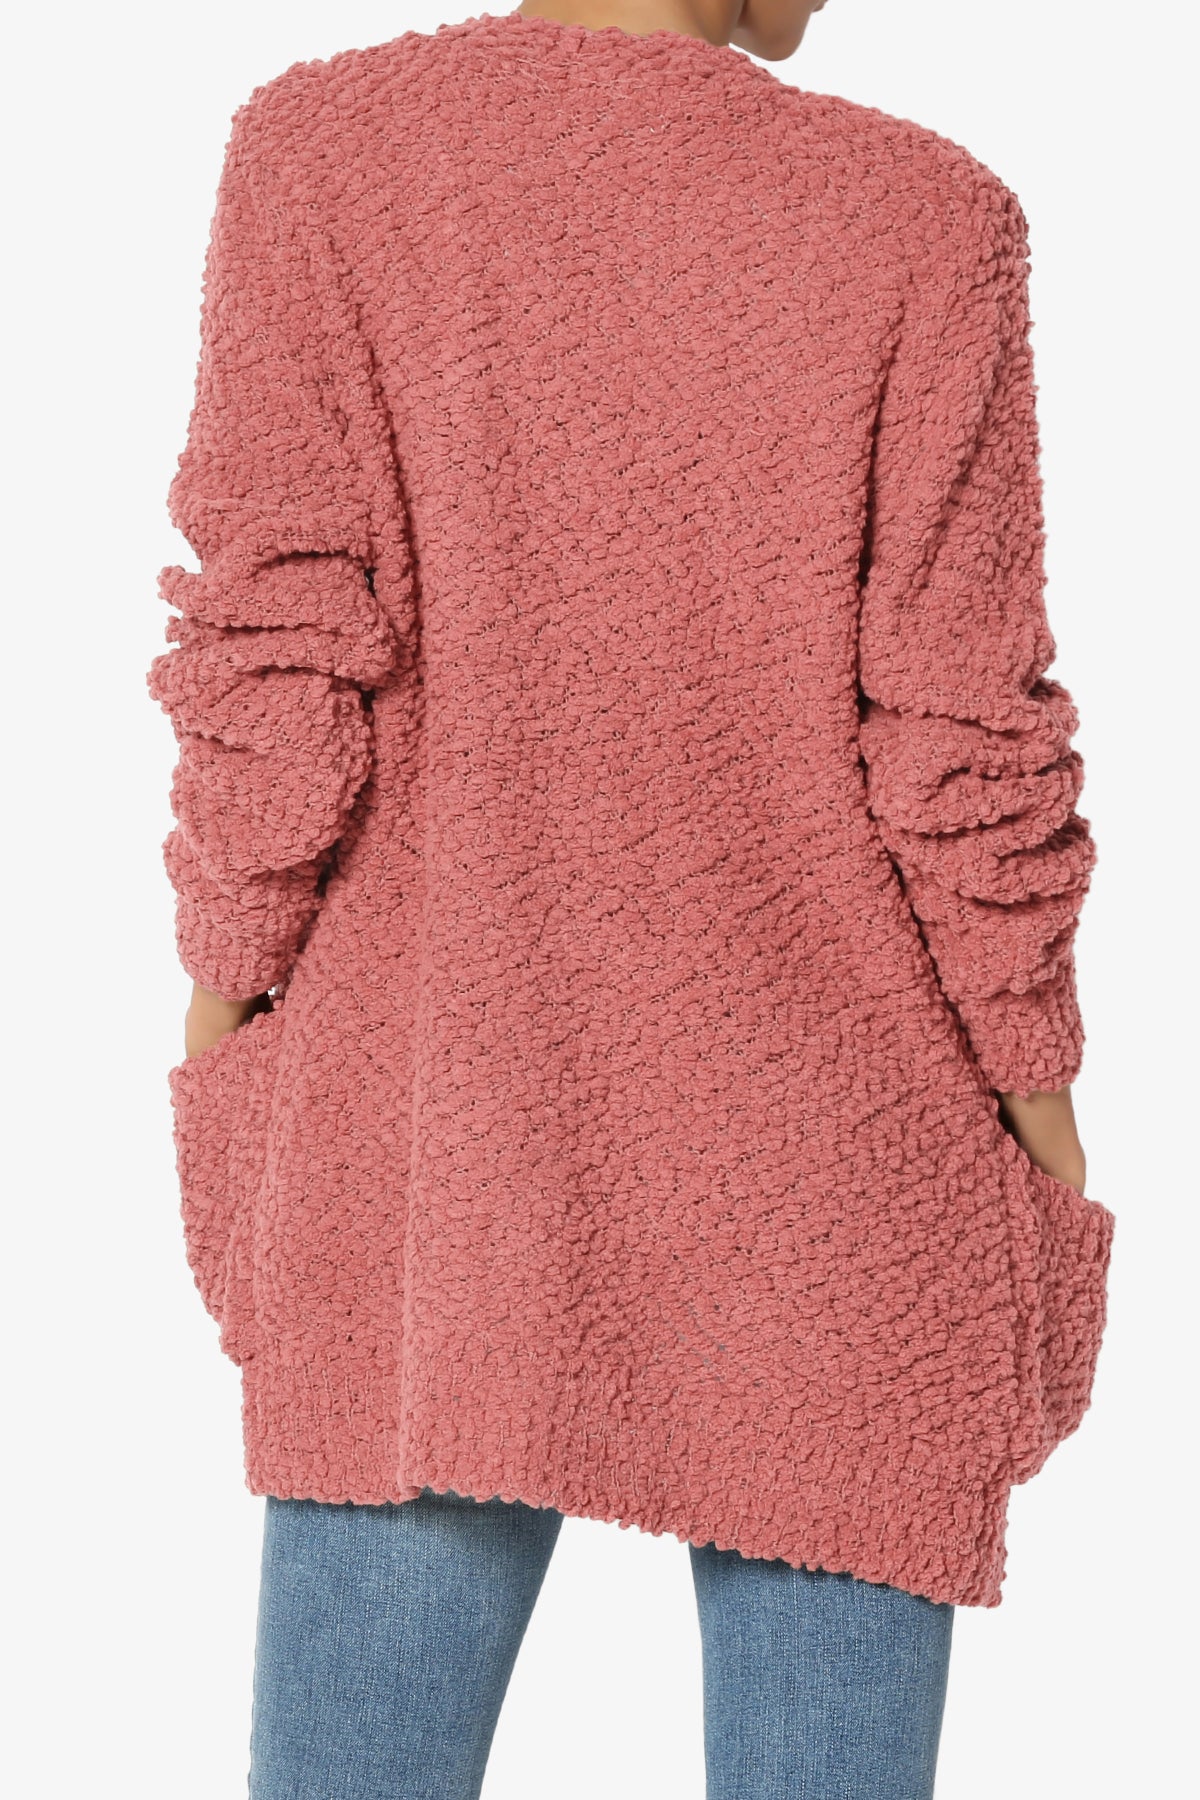 Barry Button Teddy Knit Sweater Cardigan DUSTY ROSE_2